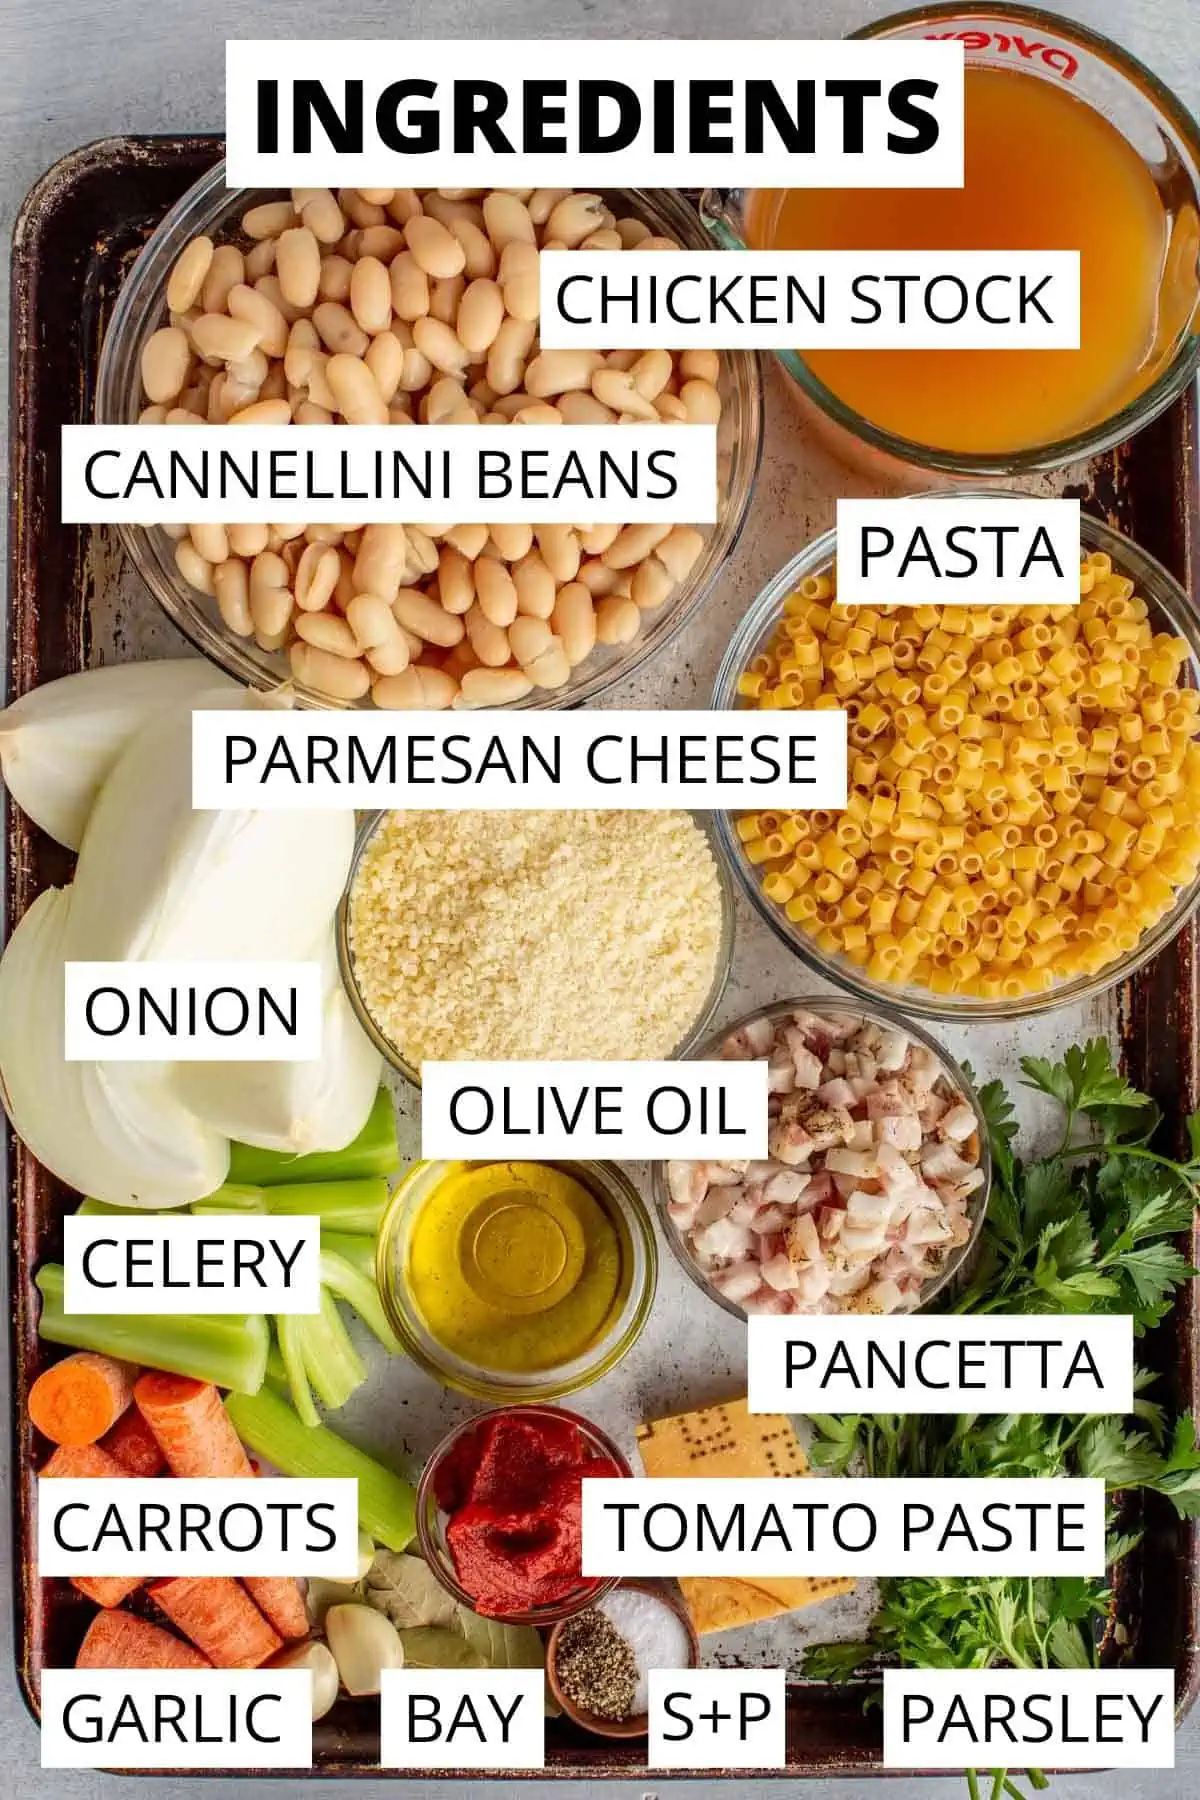 Portioned out ingredients for pasta fagioli in a labeled graphic.